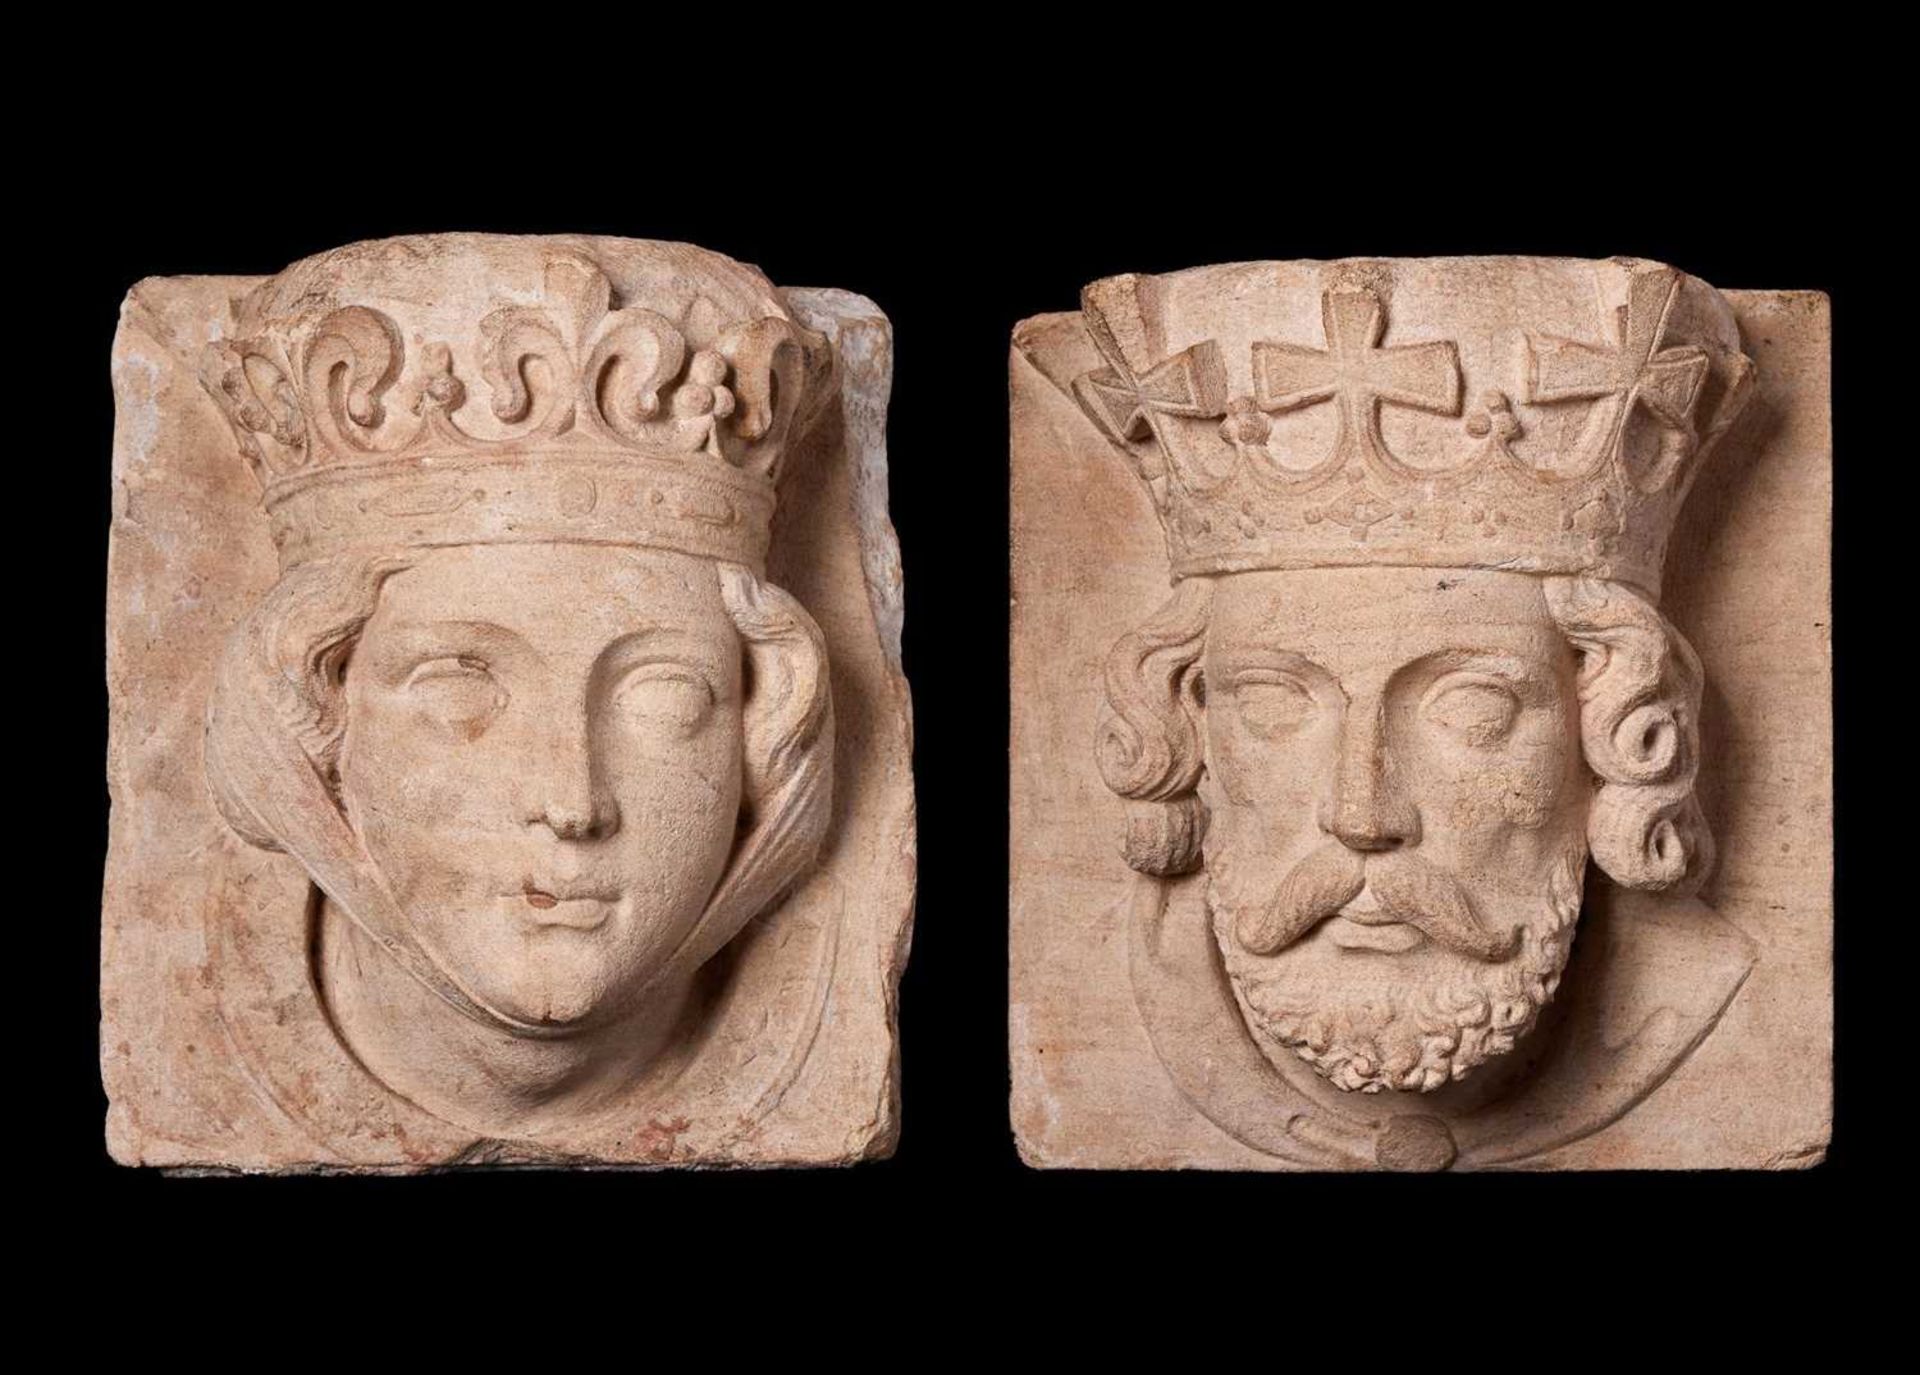 A PAIR OF 19TH CENTURY CARVED STONE HEADS OF A KING AND QUEEN